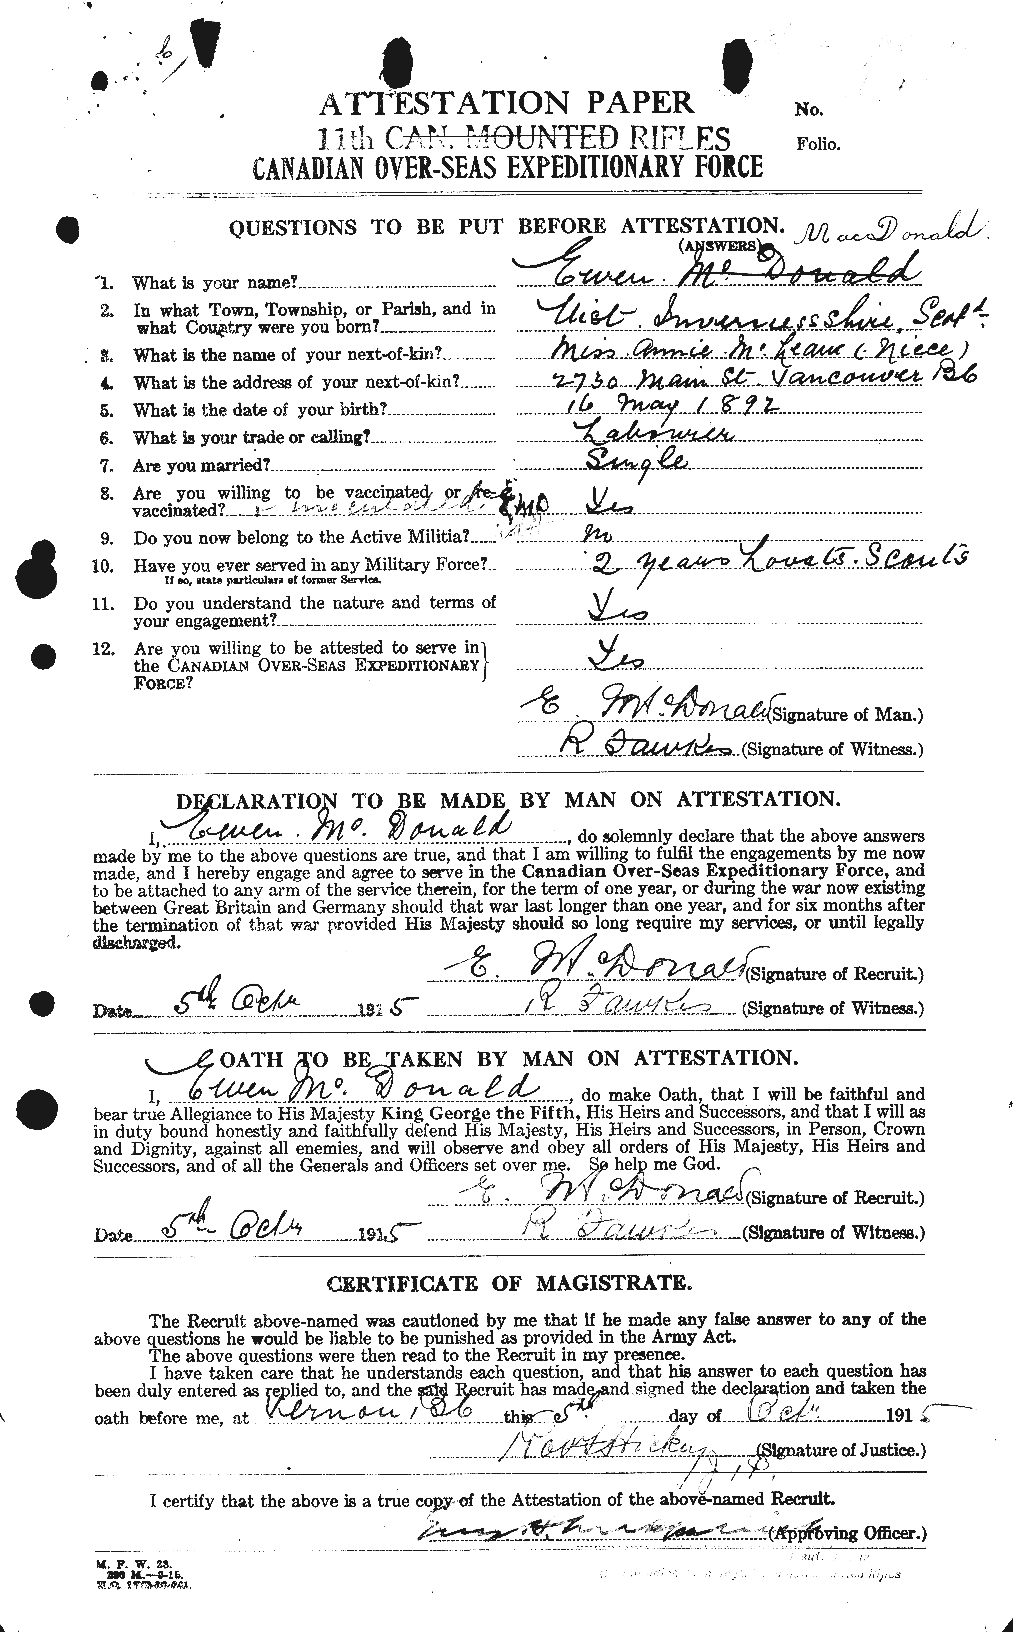 Personnel Records of the First World War - CEF 517388a